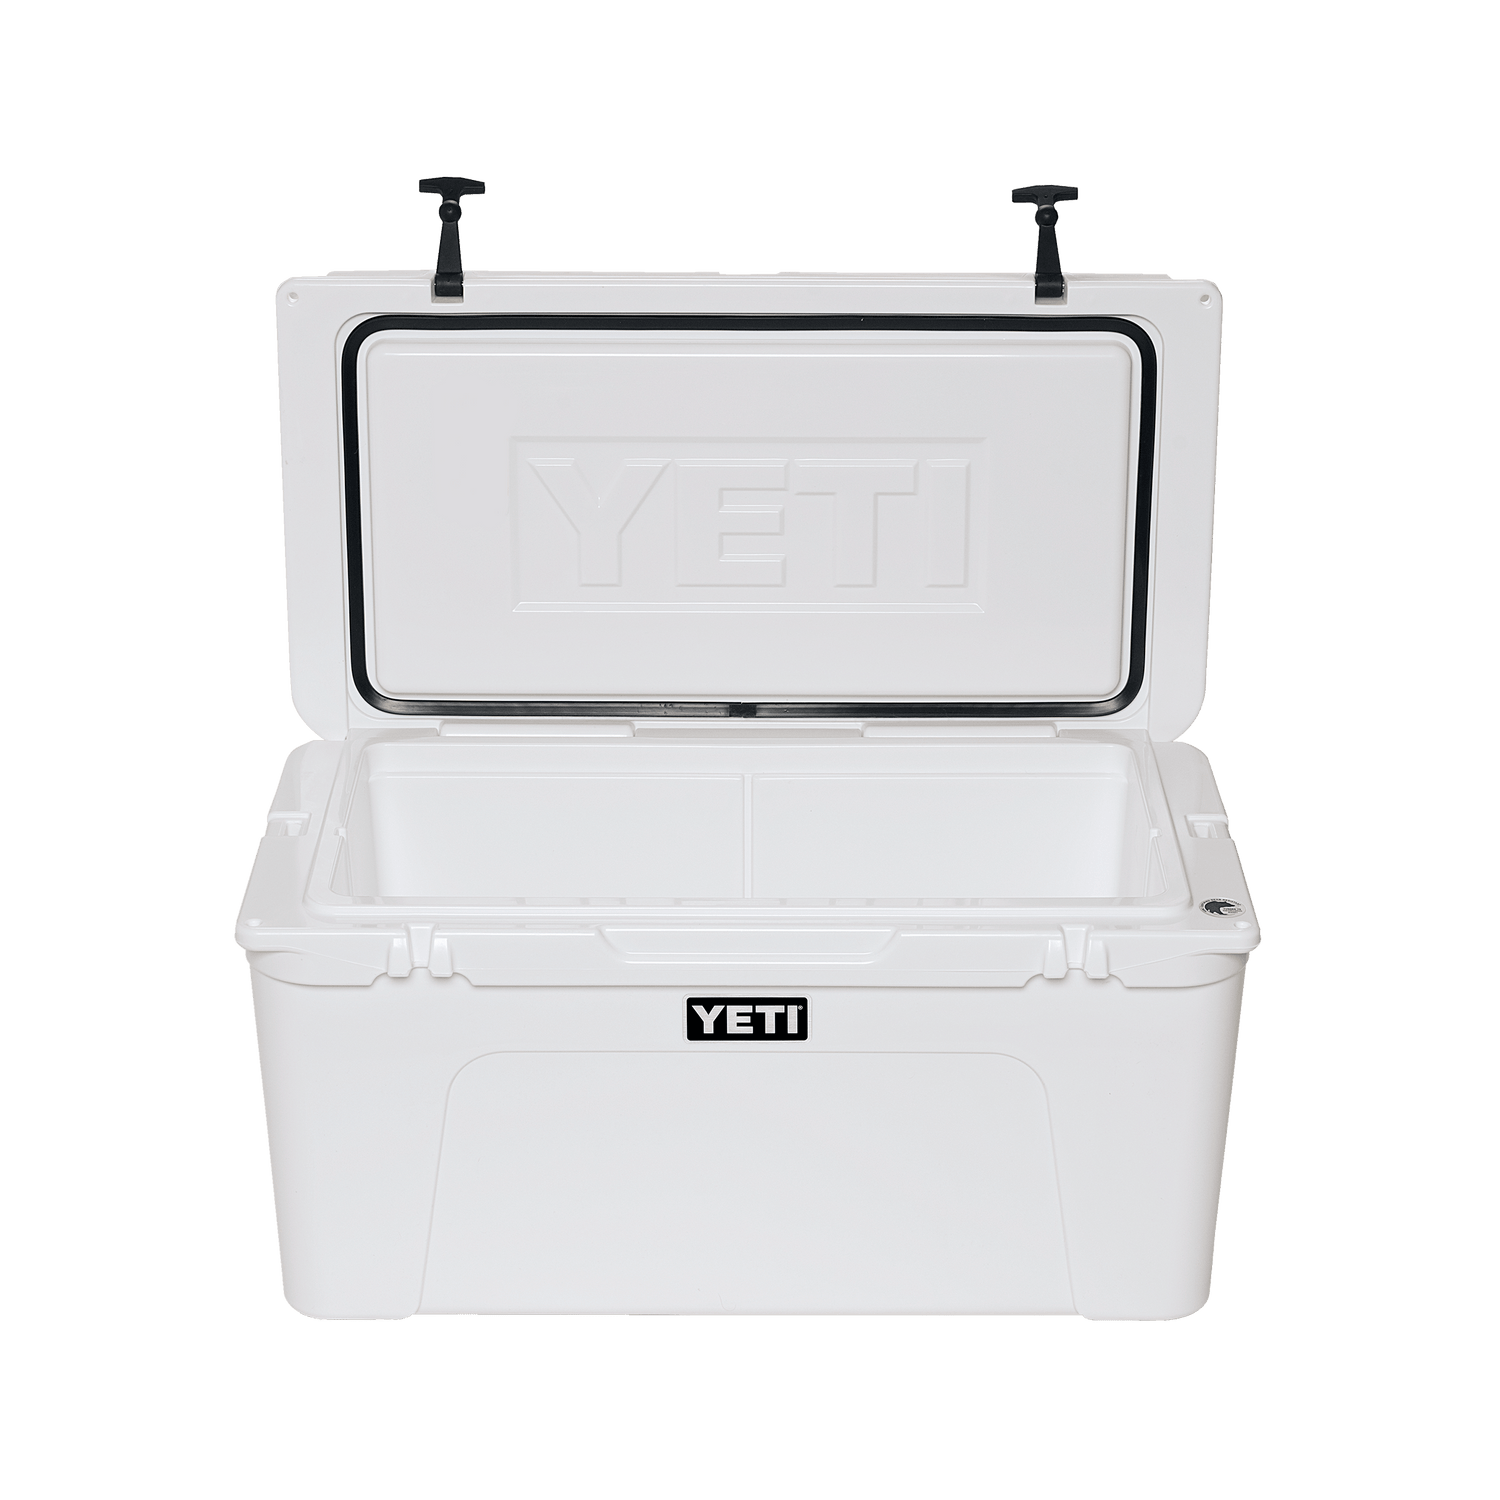 NEW in box Yeti Tundra 75 Hard Cooler - White YT75W - Gift for Him or Her  14394530753